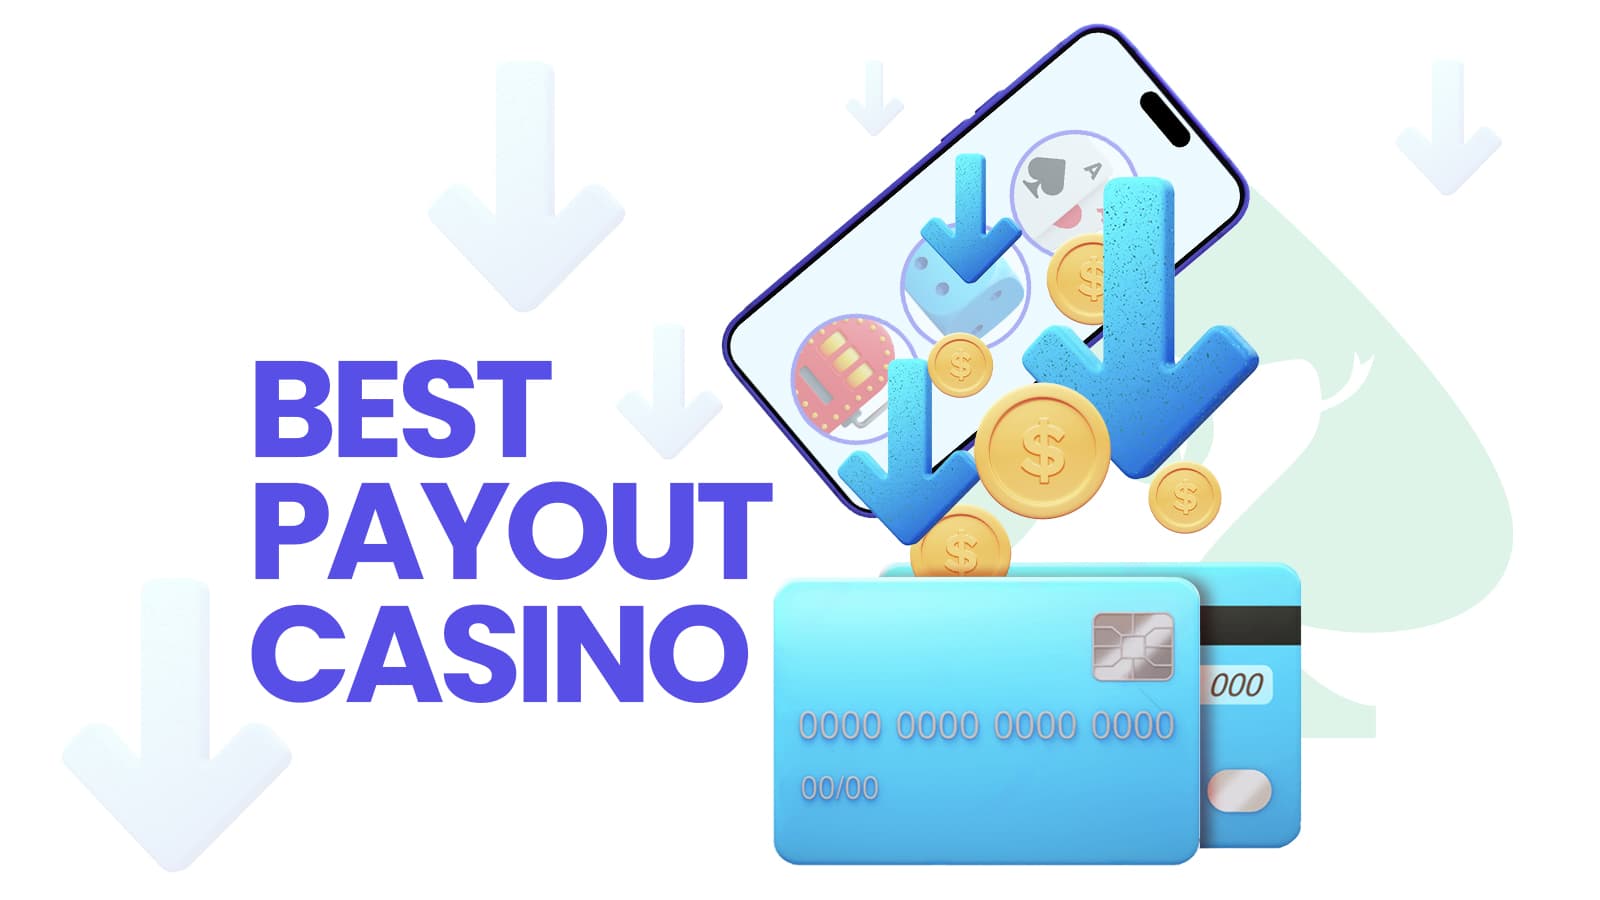 How To Find The Best Payout Casino